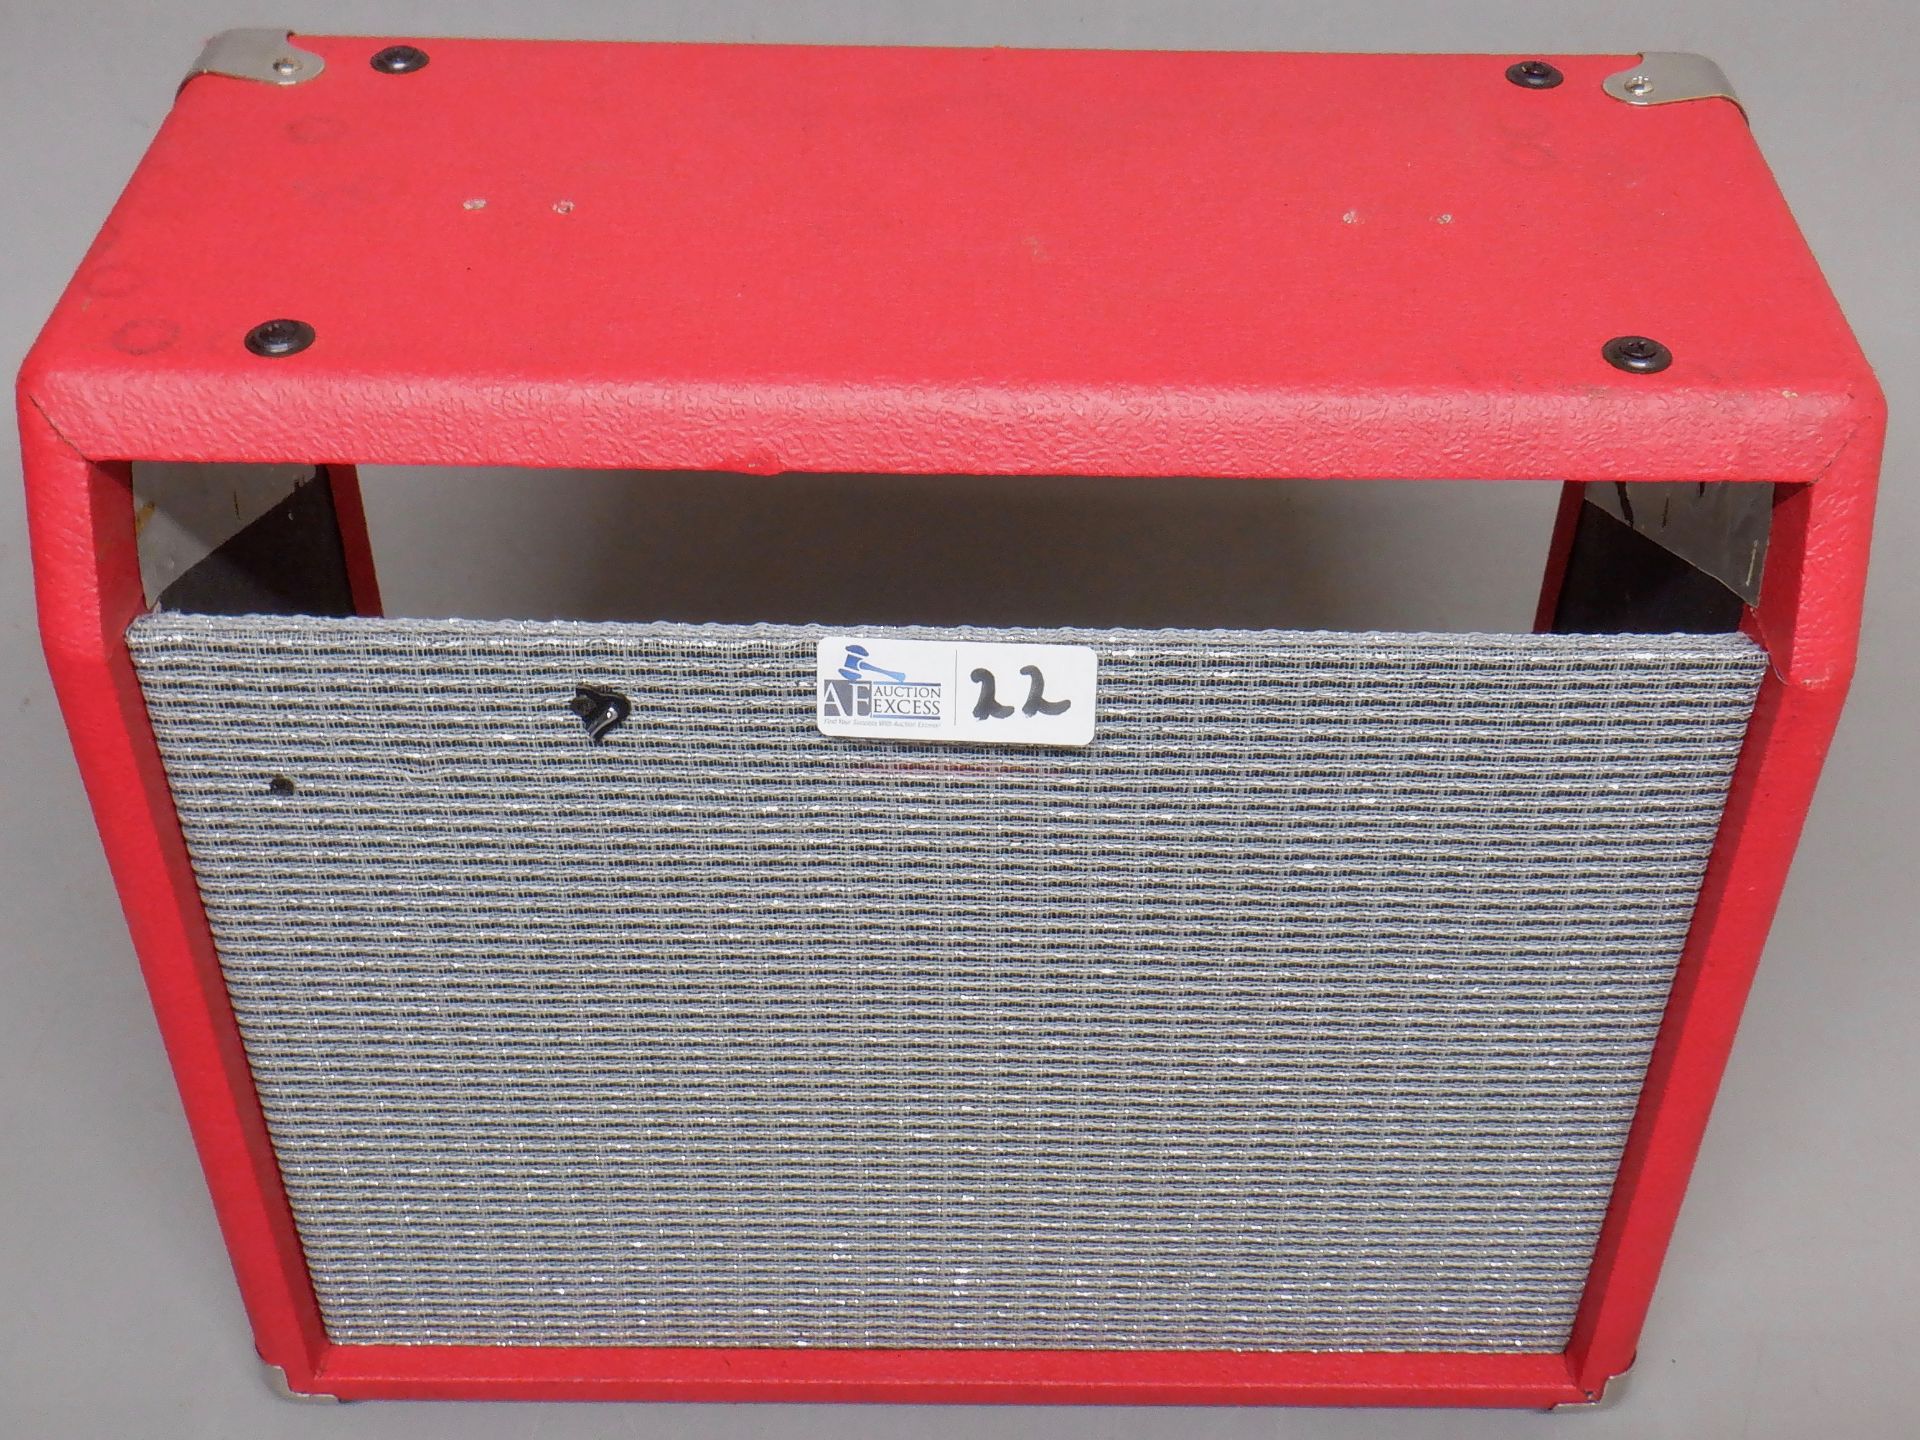 VINTAGE FENDER CHAMP AMP CHASSIS/BOX - Image 2 of 5